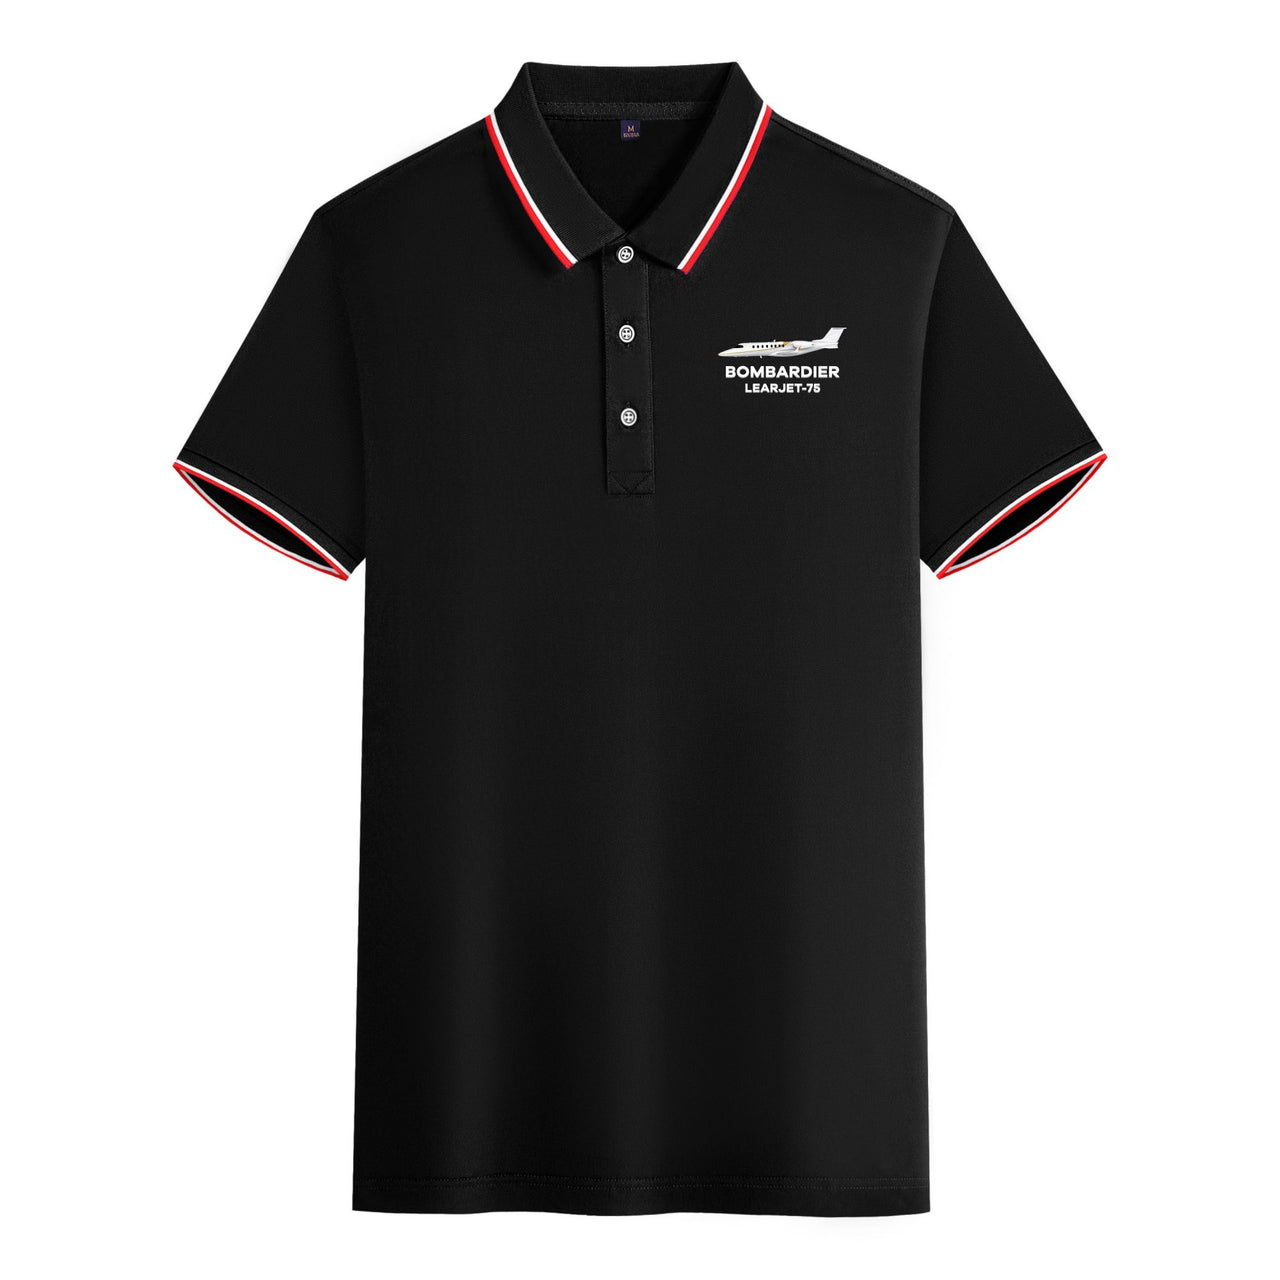 The Bombardier Learjet 75 Designed Stylish Polo T-Shirts